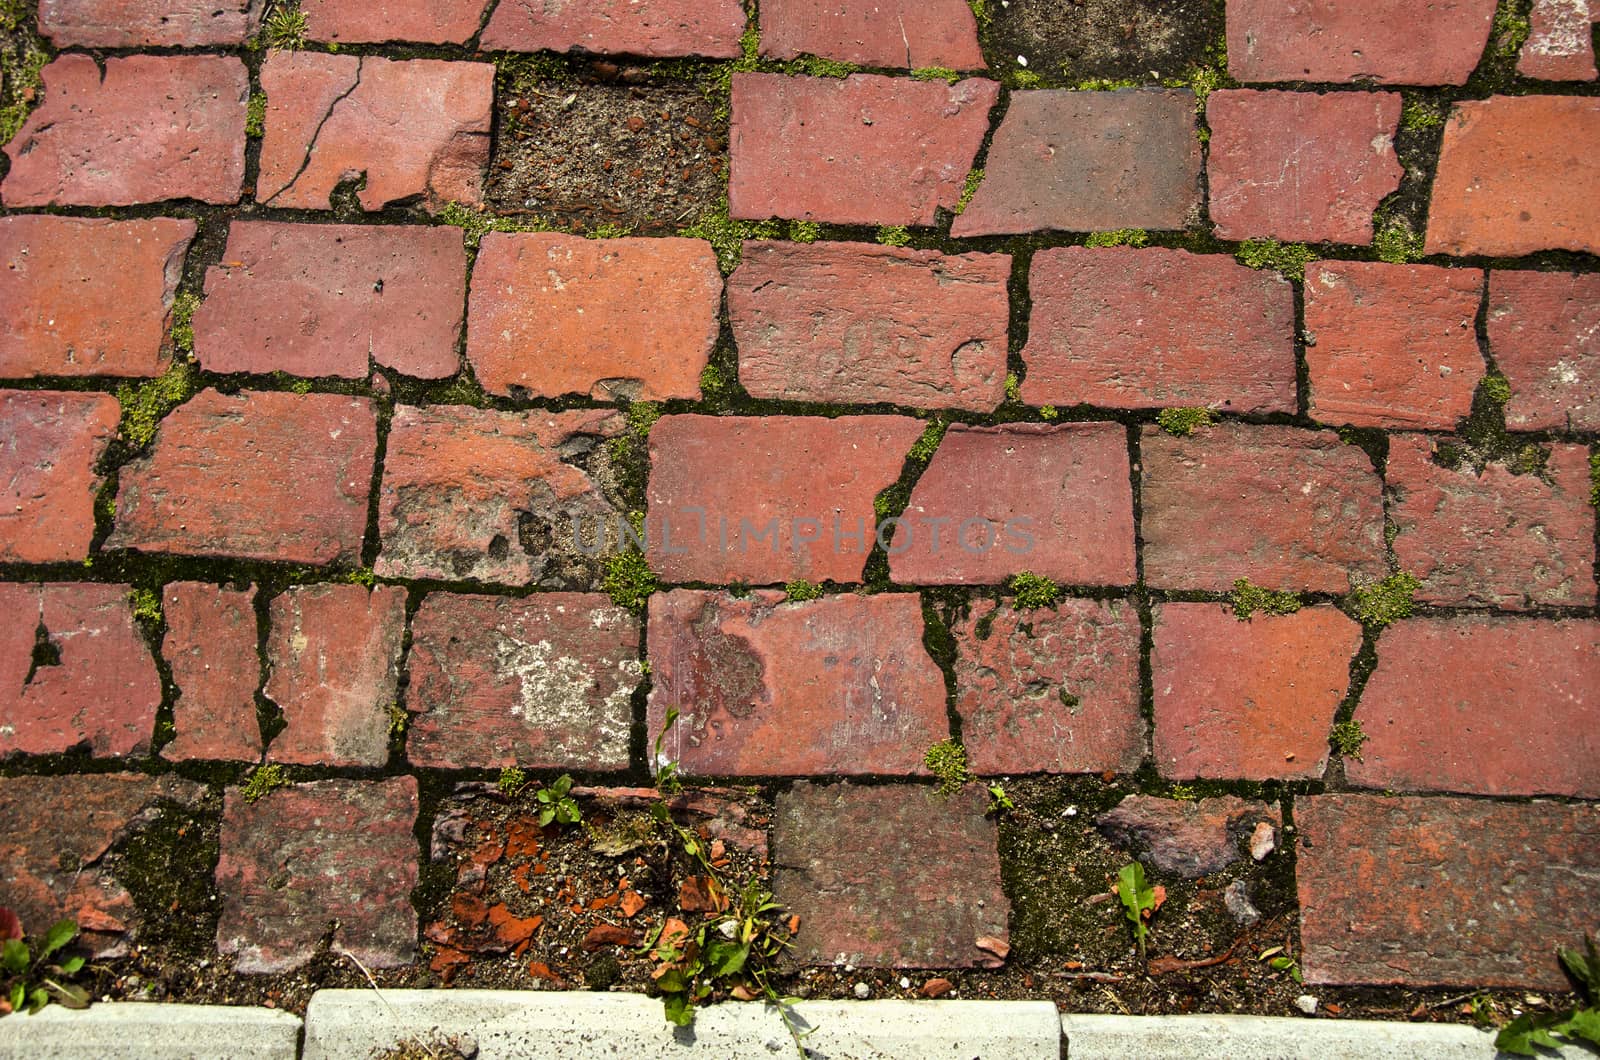 Old cracked red brick decorative pavement background